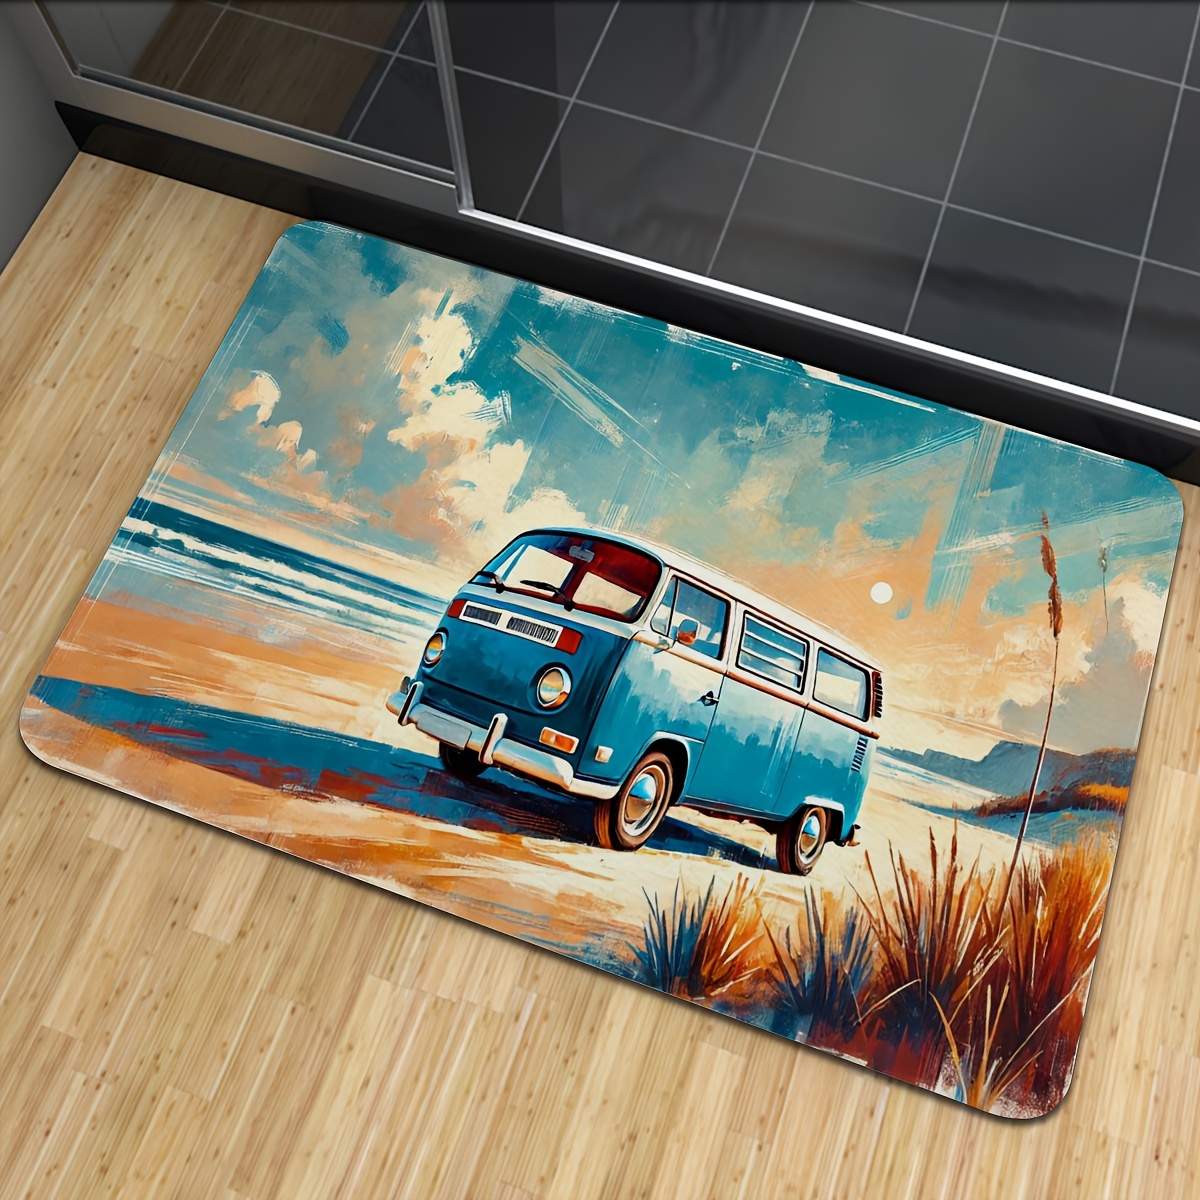 

Beachside Bus Print Bath Mat, Non-slip Back, Machine Washable, Polyester Flannel Rug, Tpr Backing, Indoor Floor Mat For Bathroom, Kitchen, Bedroom, Office - 15.4x23.4 Inches, Home Decor Carpet